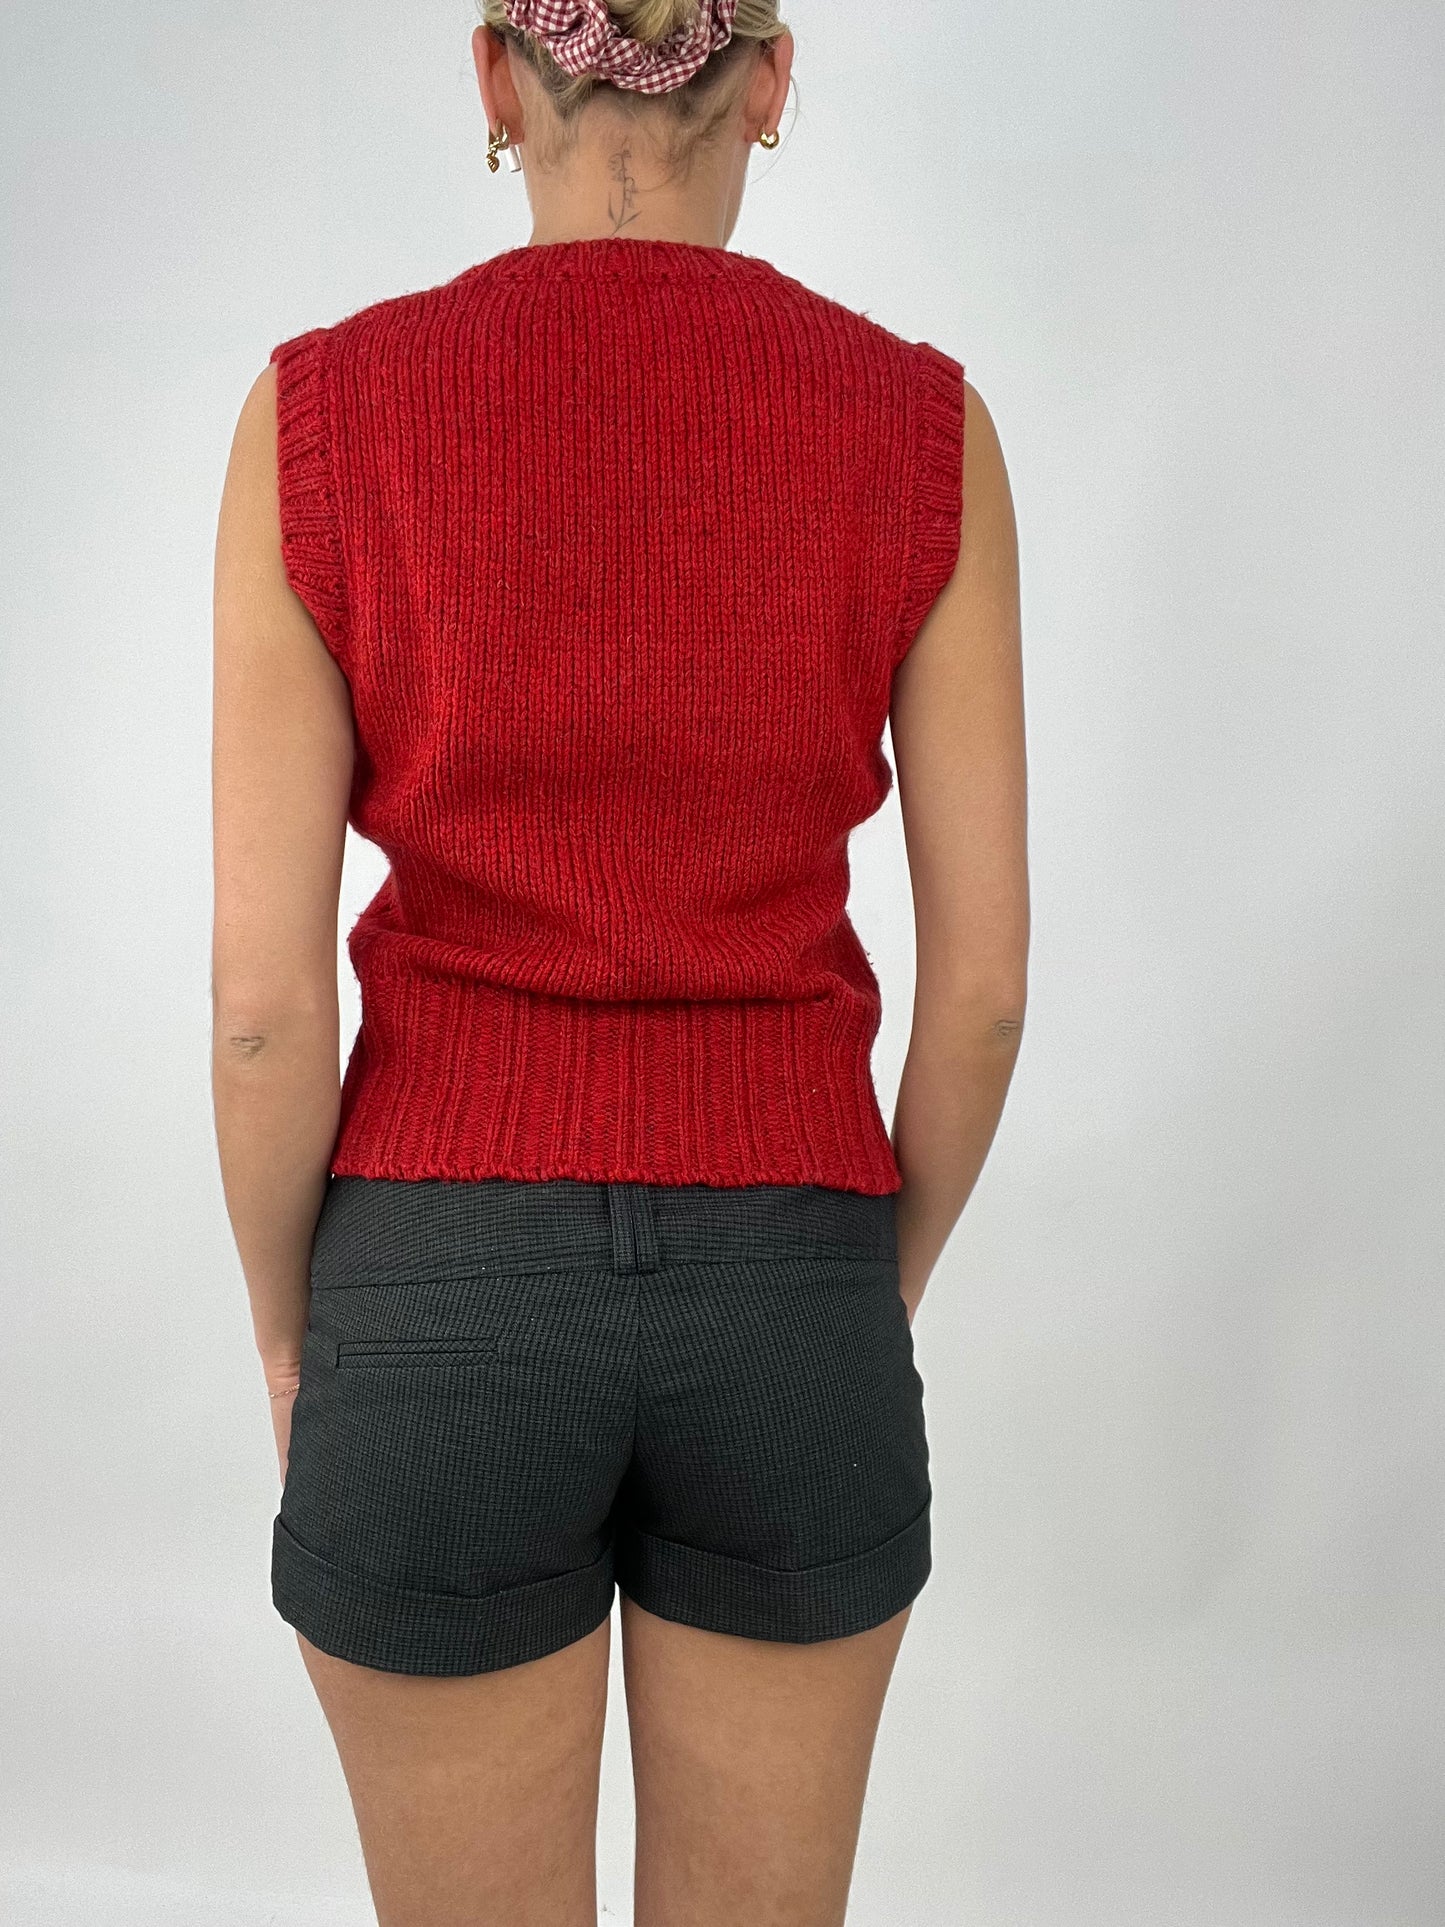 TAYLOR SWIFT DROP | small red knitted sweater vest